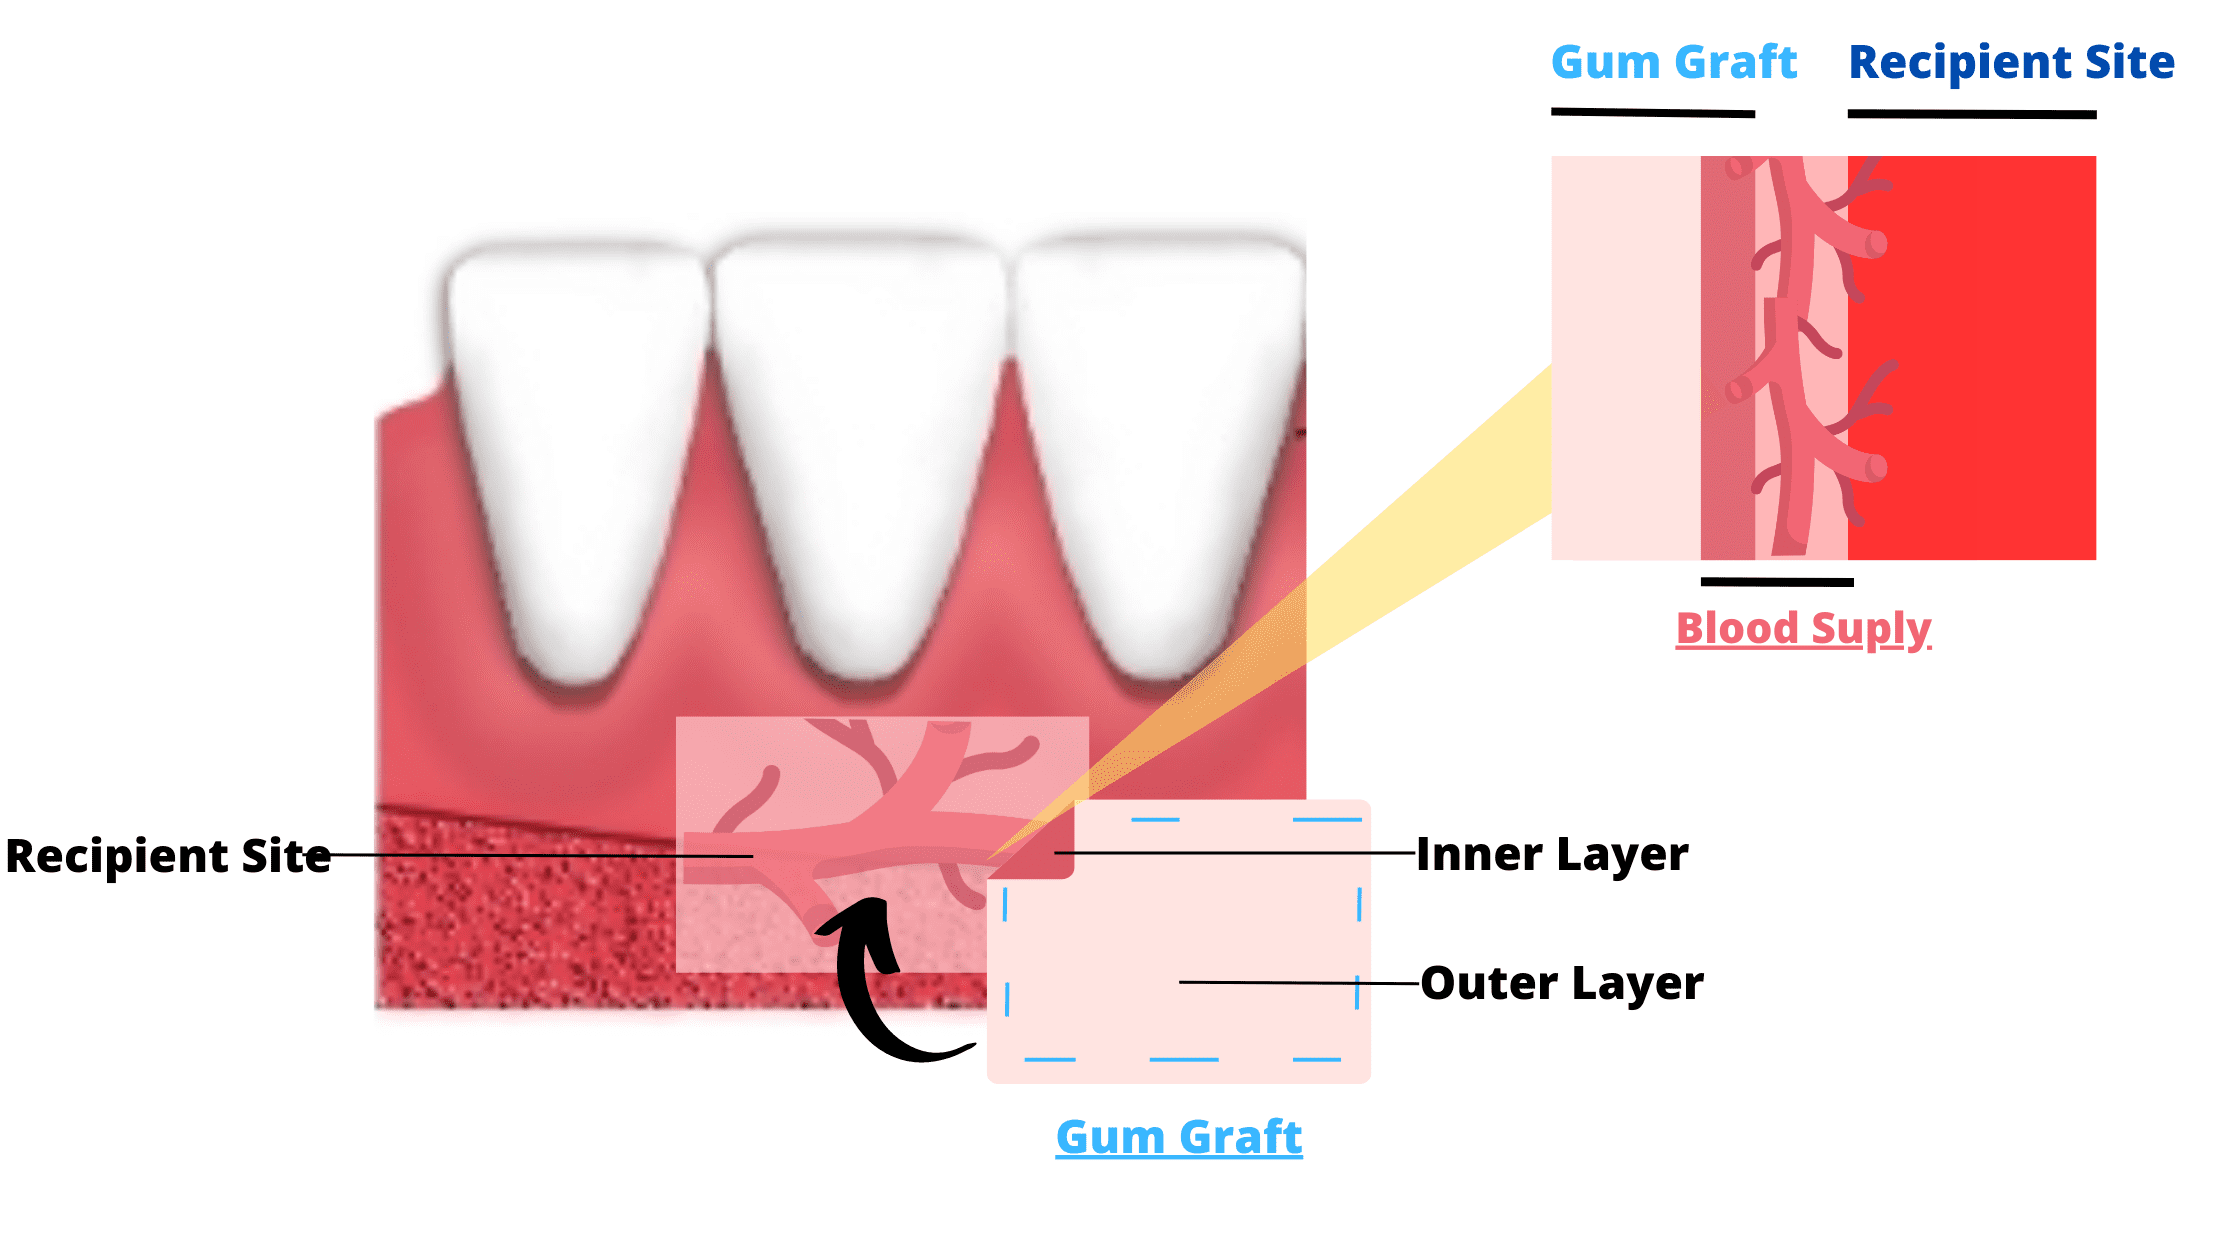 Blood circulation of the gingival graft after being sutured in the recipient site